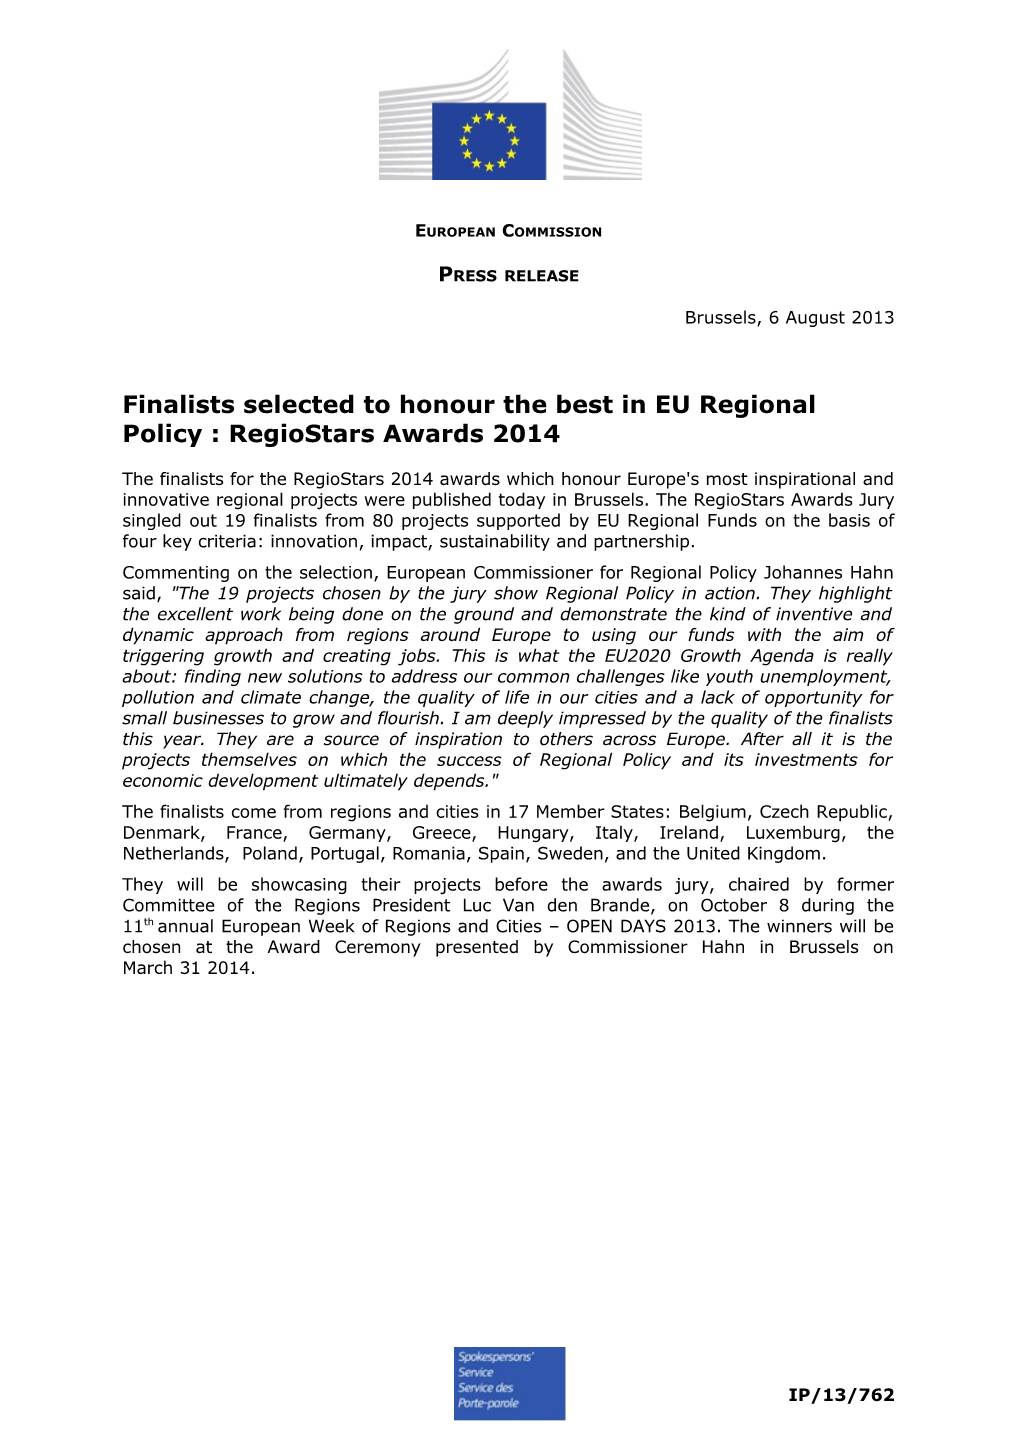 Finalists Selected to Honour the Best in EU Regional Policy : Regiostars Awards 2014